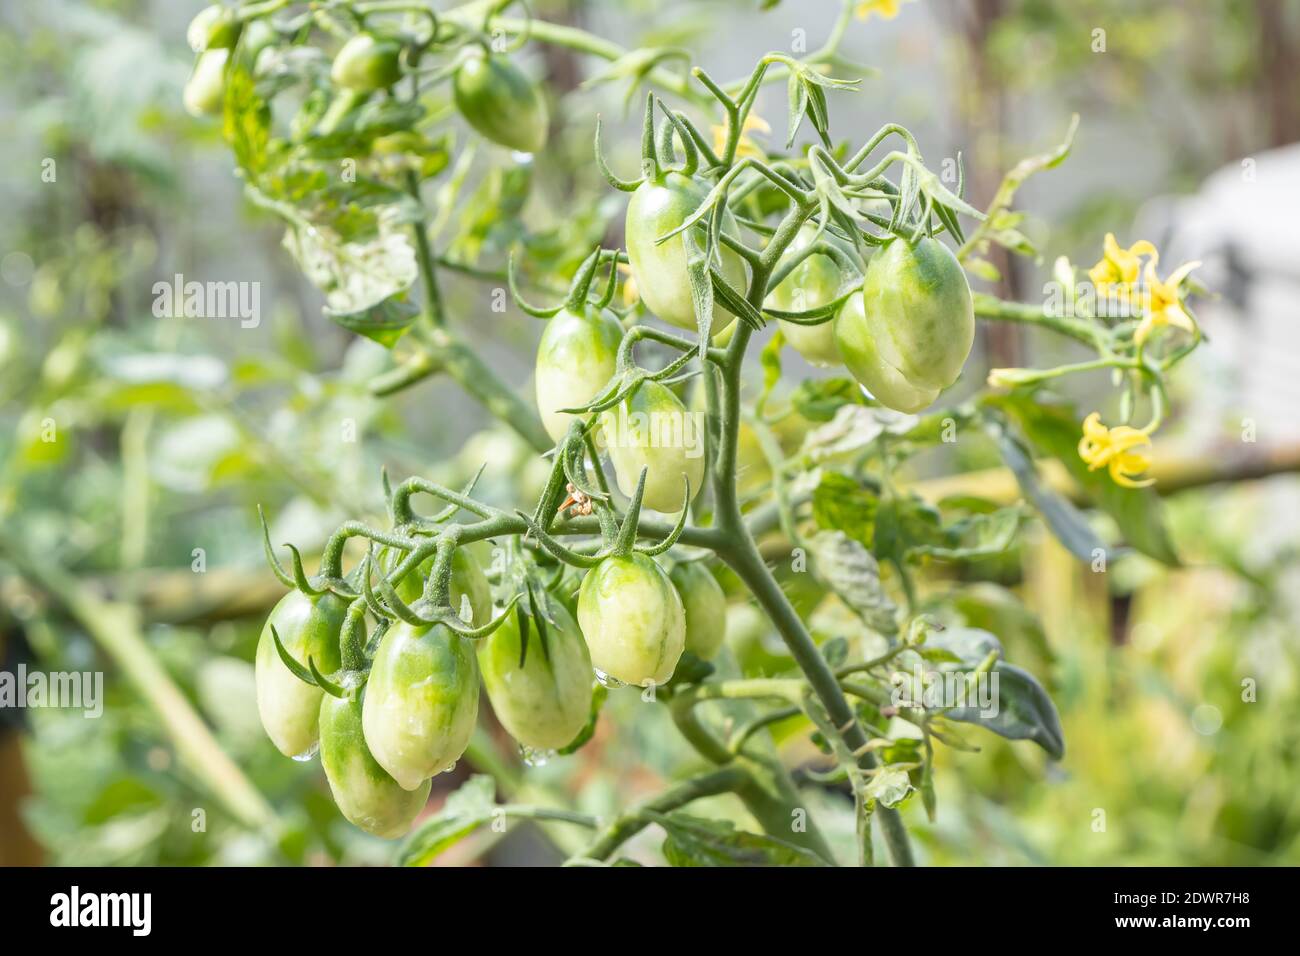 There are many green Cherry tomatoes or Lycopersicon esculentum on the tree. Stock Photo